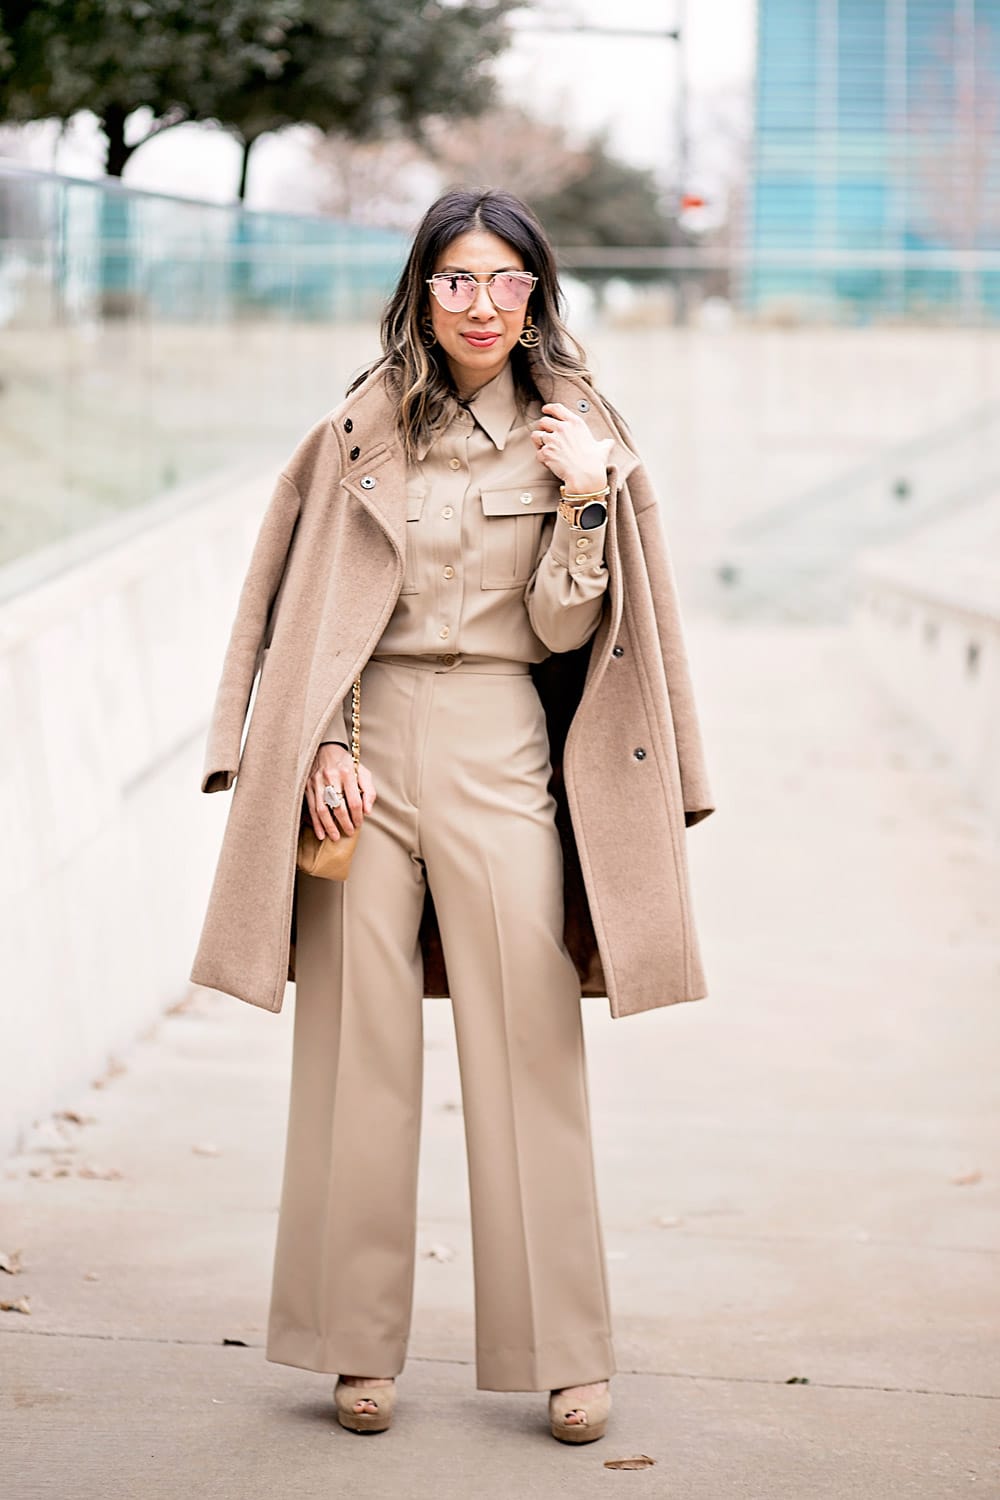 camel coat and beige coord set chanel earrings